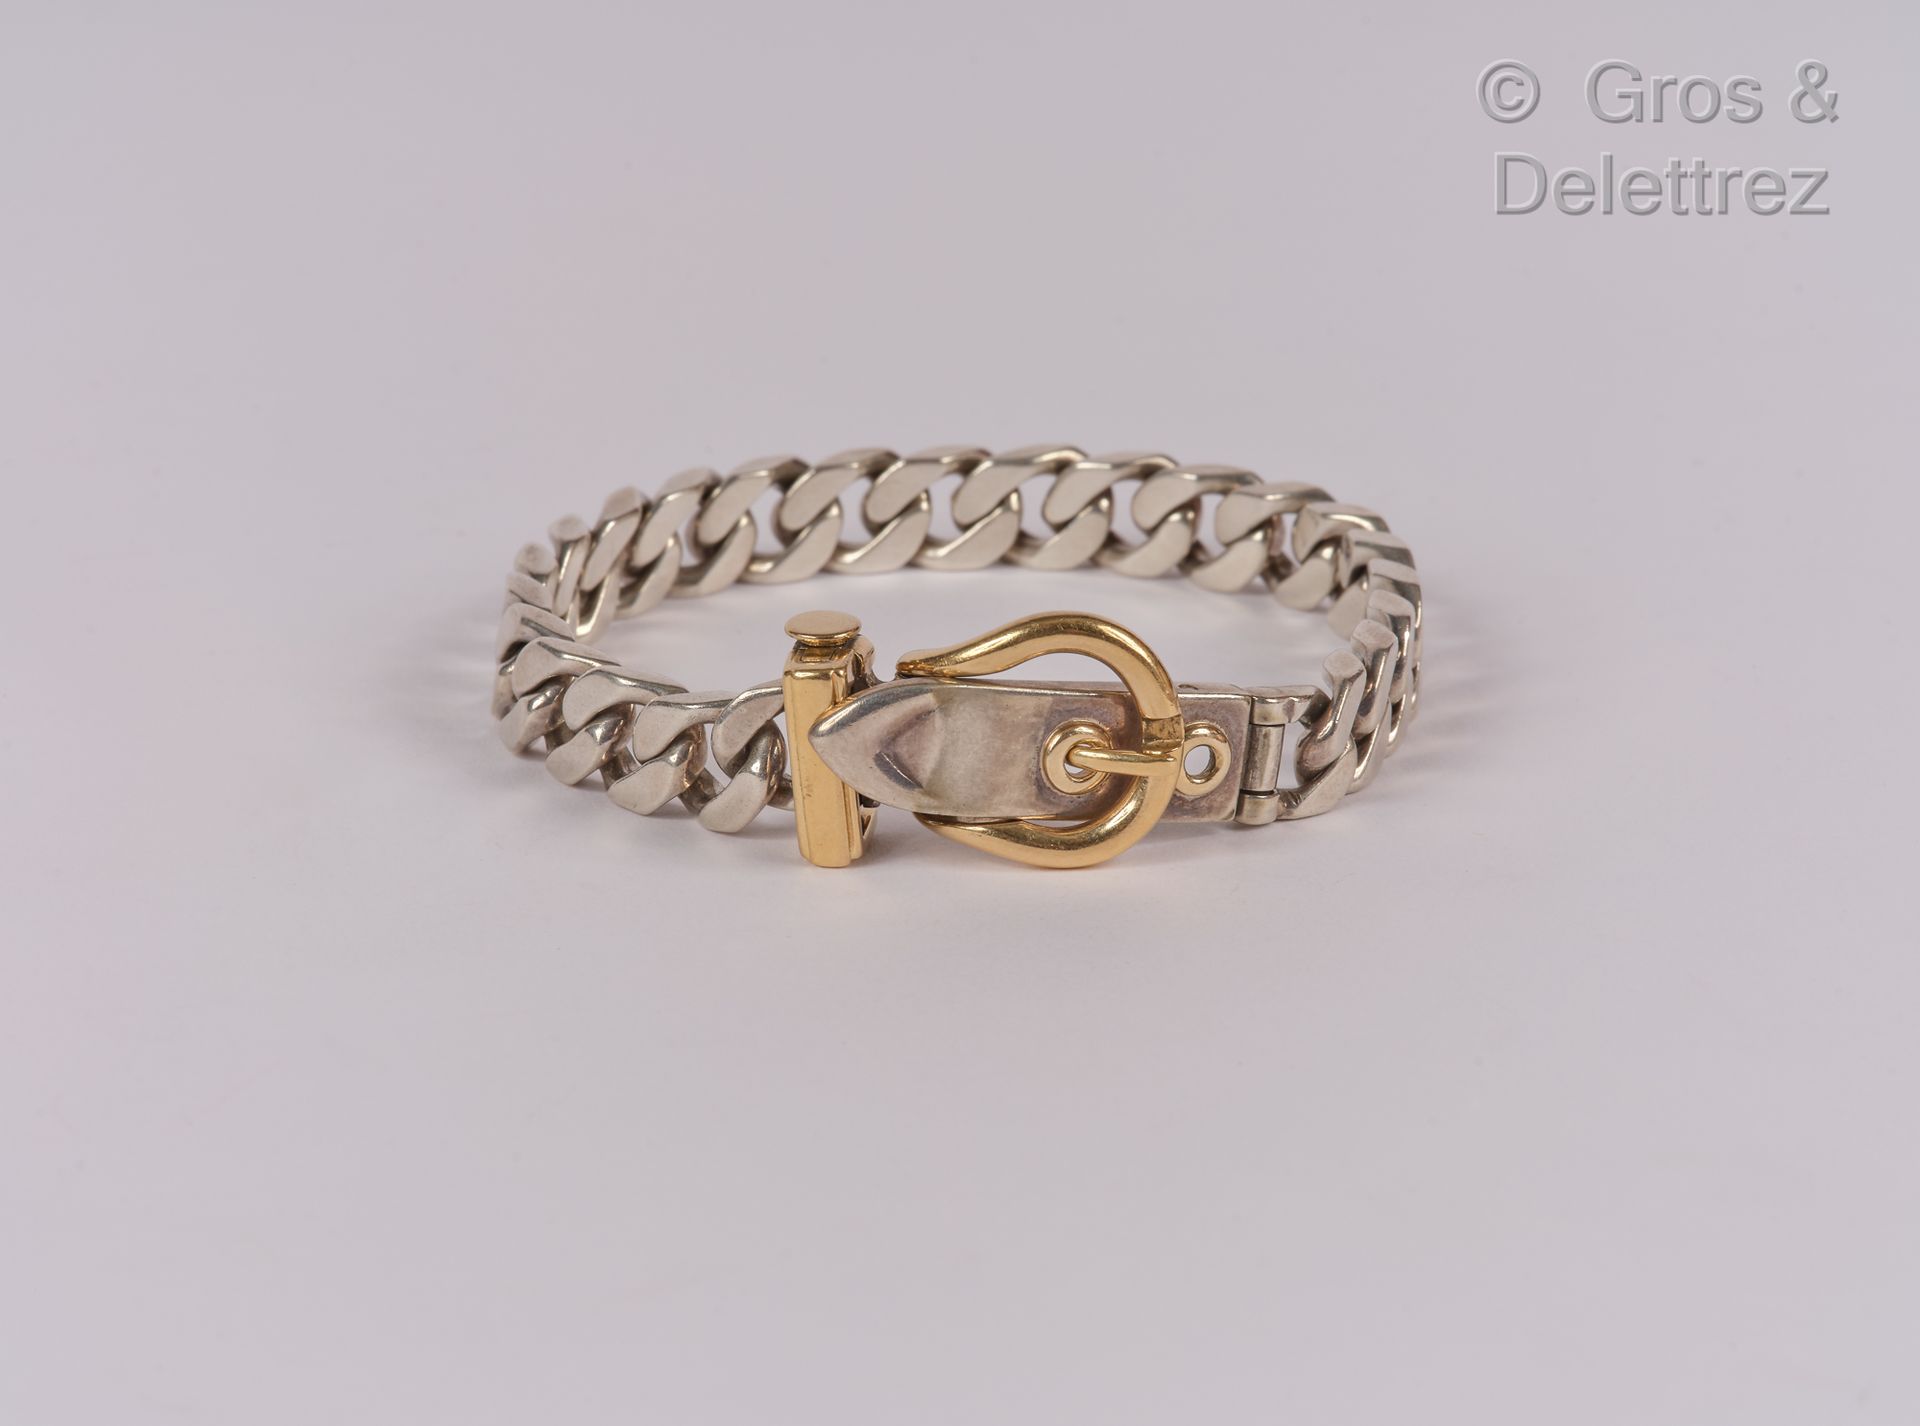 HERMES Paris Bracelet " Sellier " in silver 925 thousandths and motives in yello&hellip;